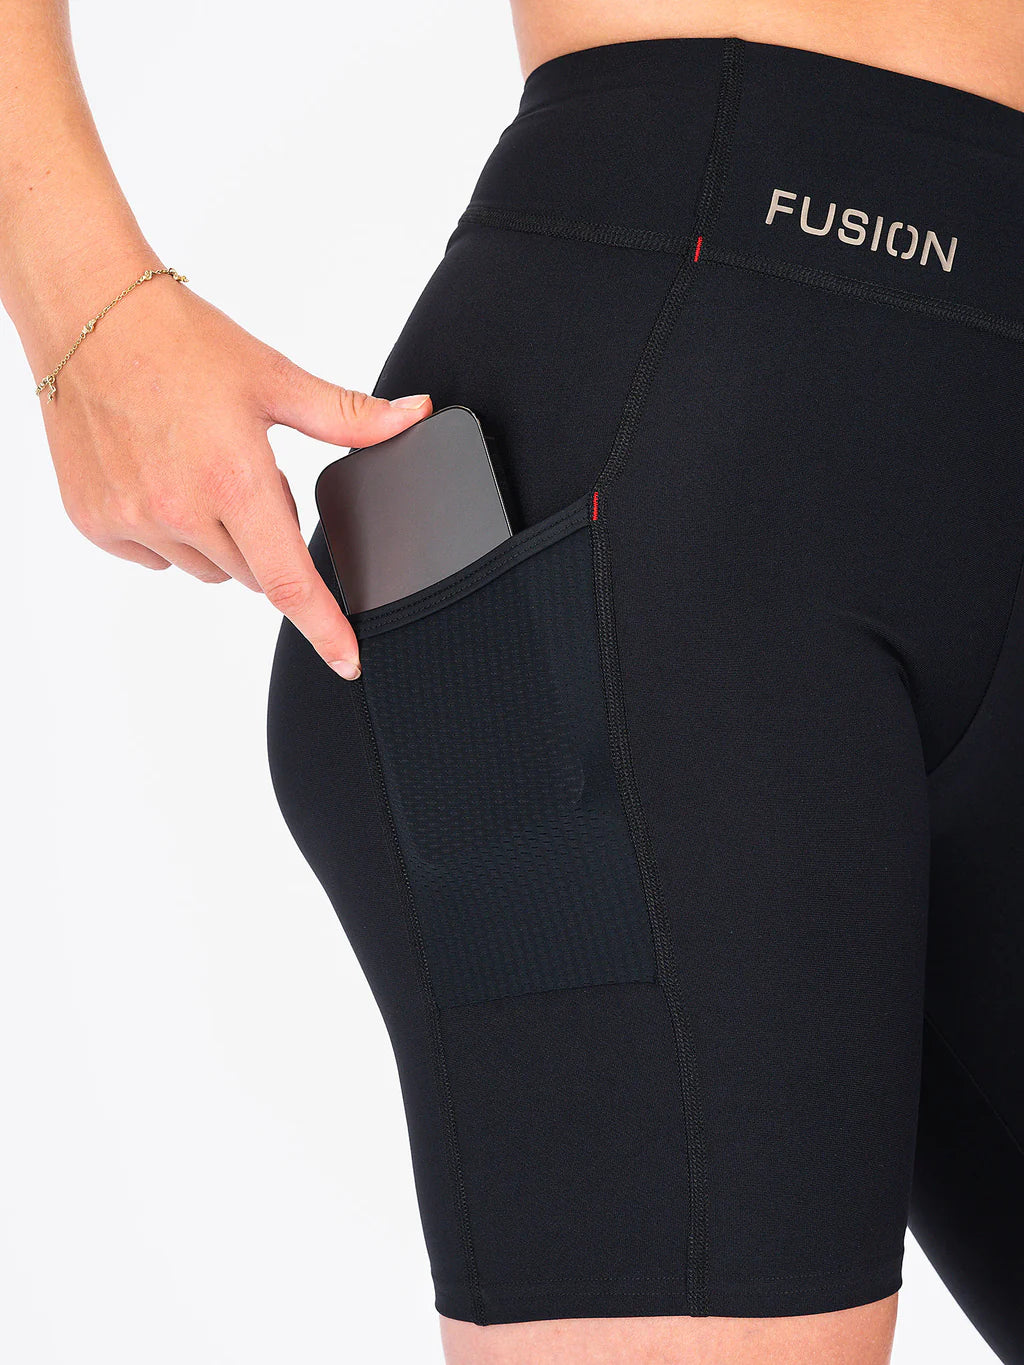 Fusion Womens Short Training Tights with phone pocket